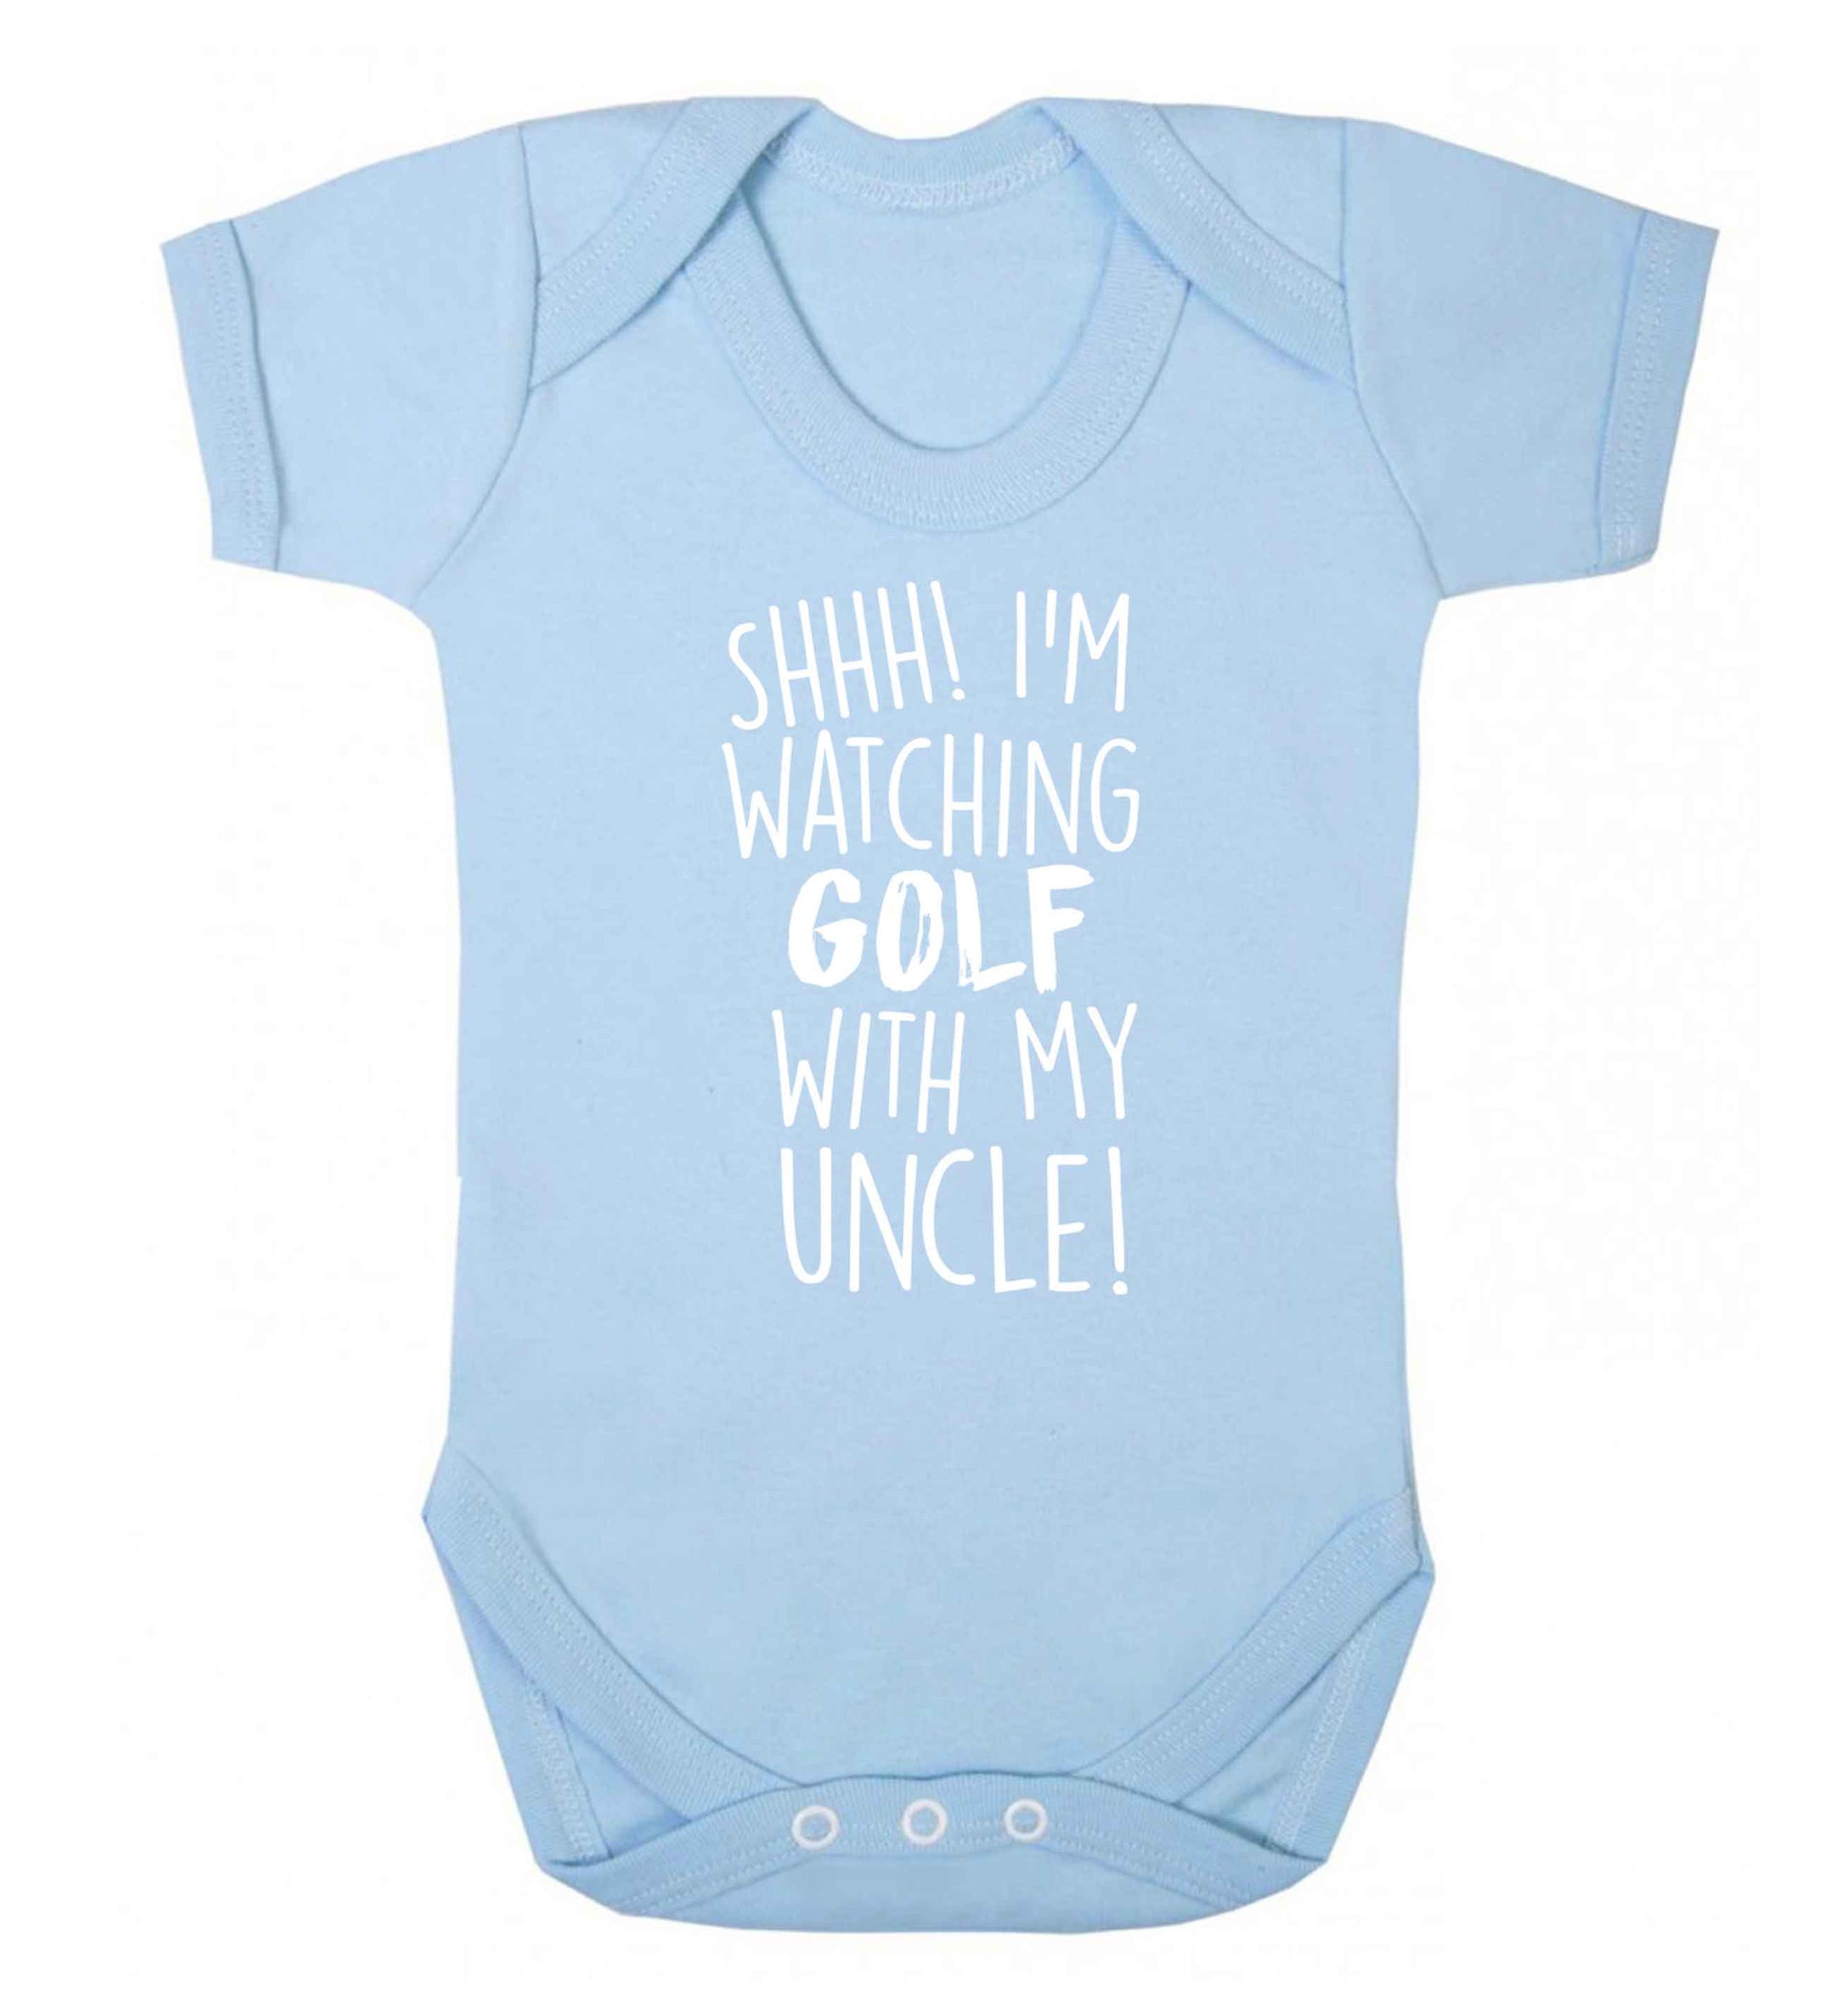 Shh I'm watching golf with my uncle Baby Vest pale blue 18-24 months